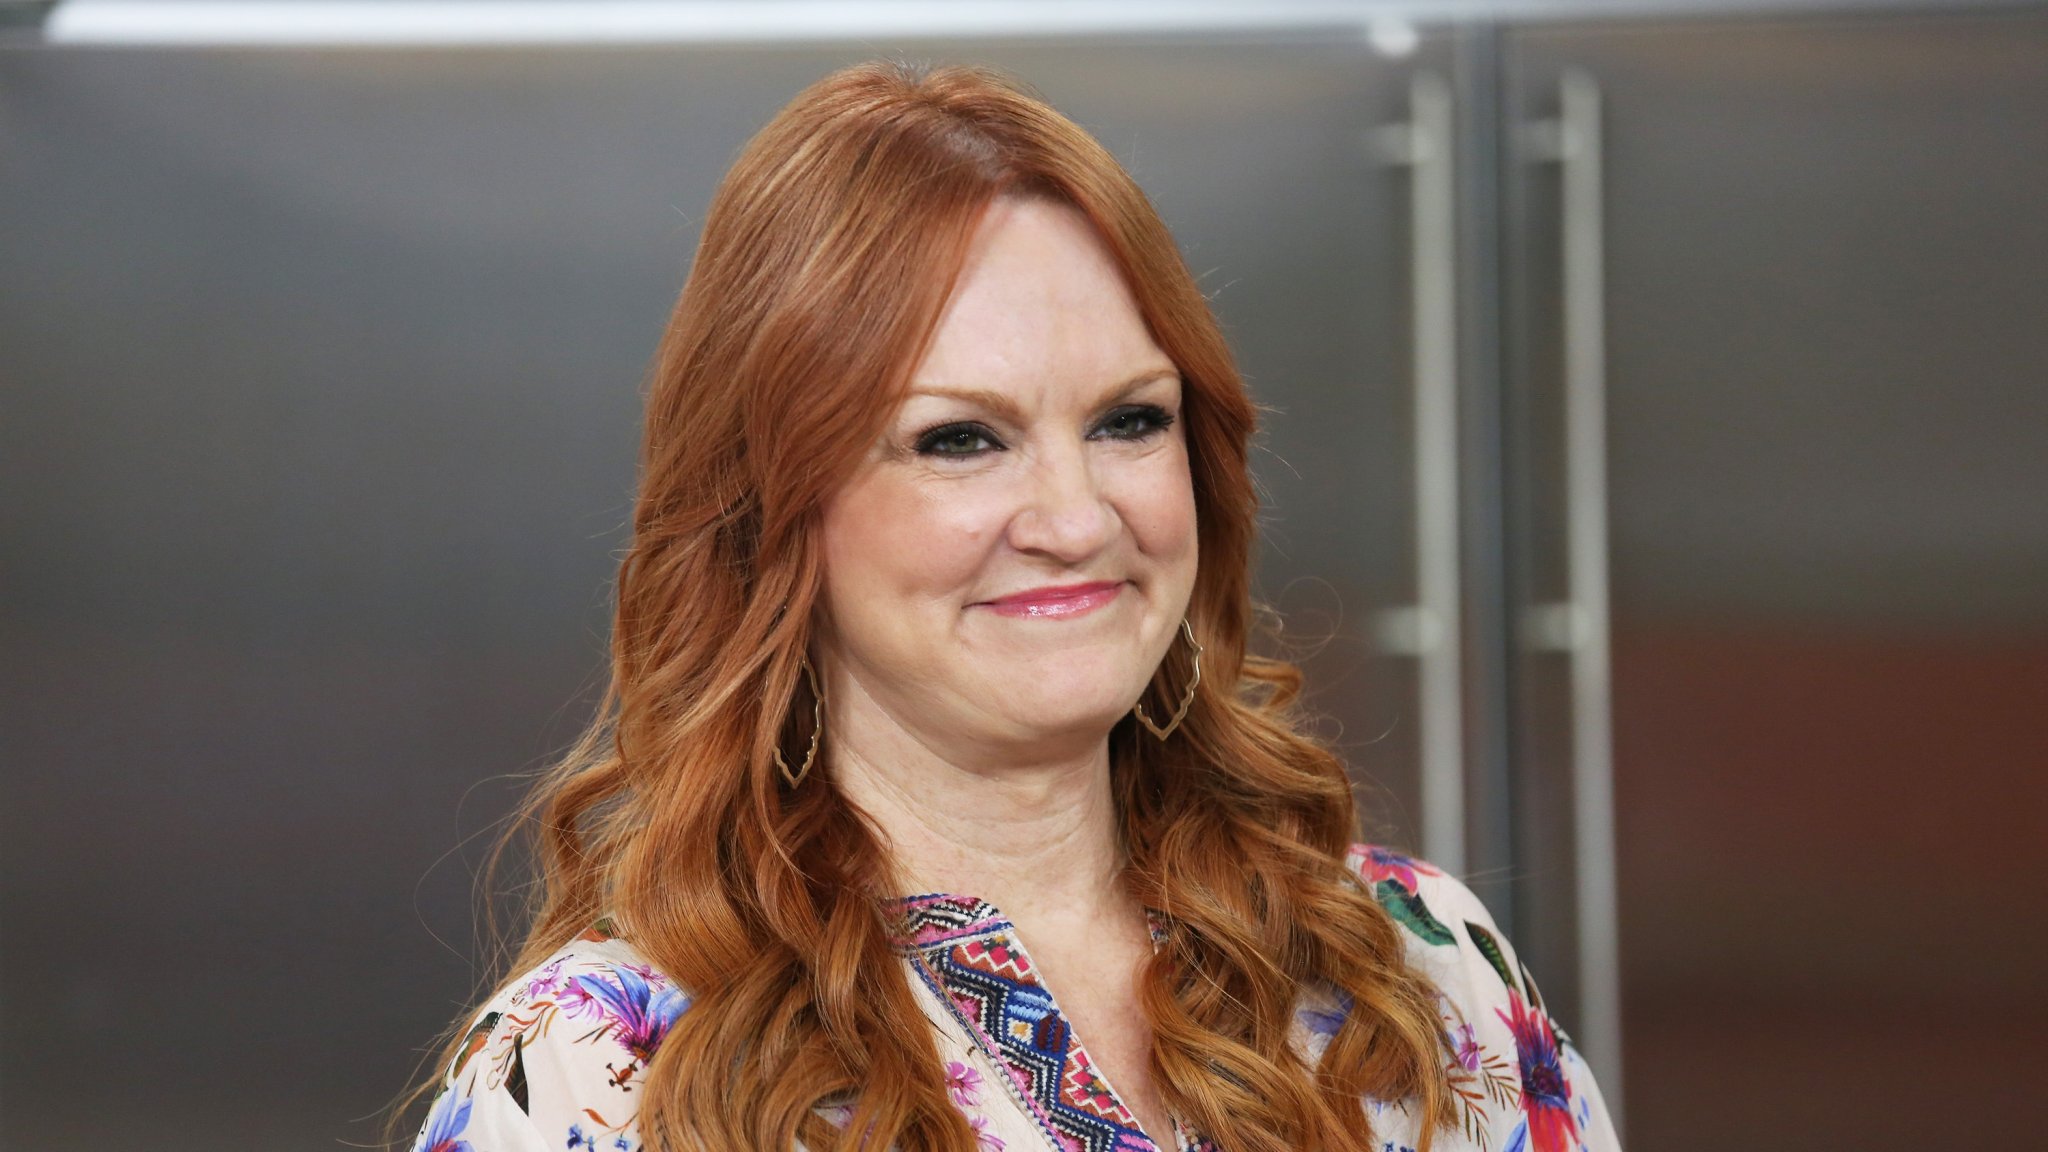 Pioneer Woman Ree Drummond Reveals She Has Lost 50 Pounds And How Her Family Inspired Her